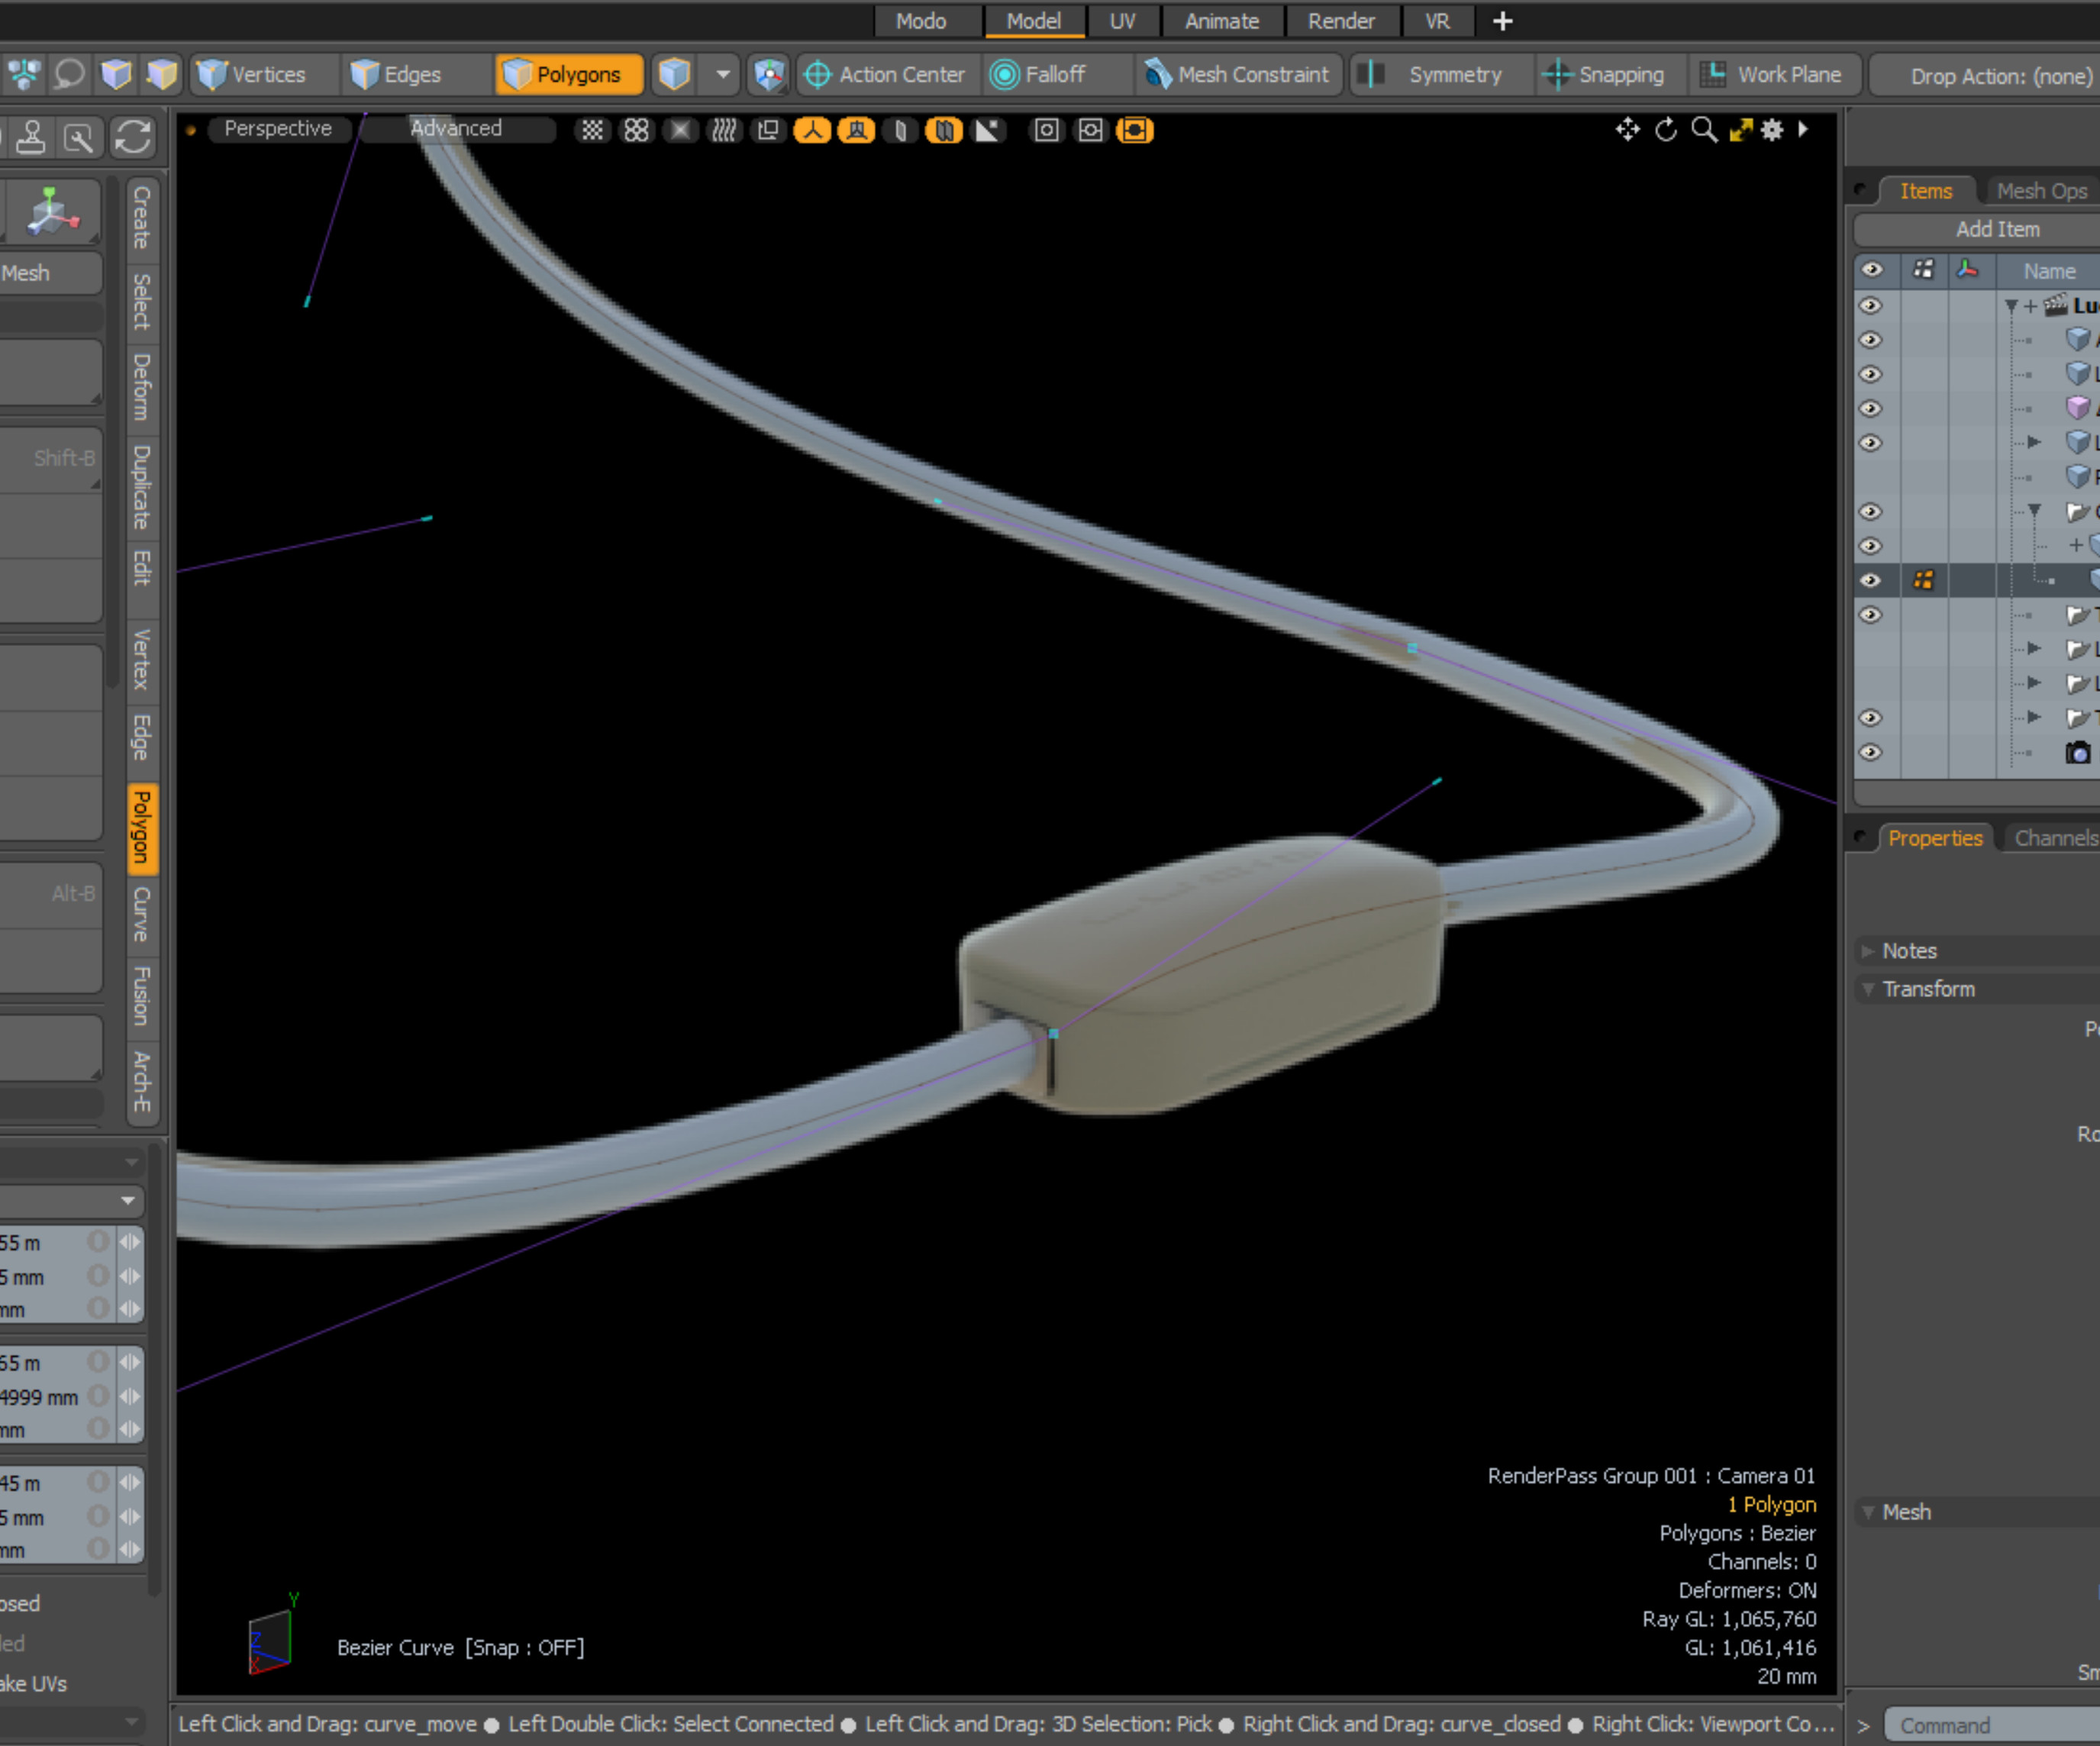 More sausage-making / behind the scenes: This shows how using a bezier deformer combined with some procedural geometry leads to an *easily* art-directable EV charging cable.